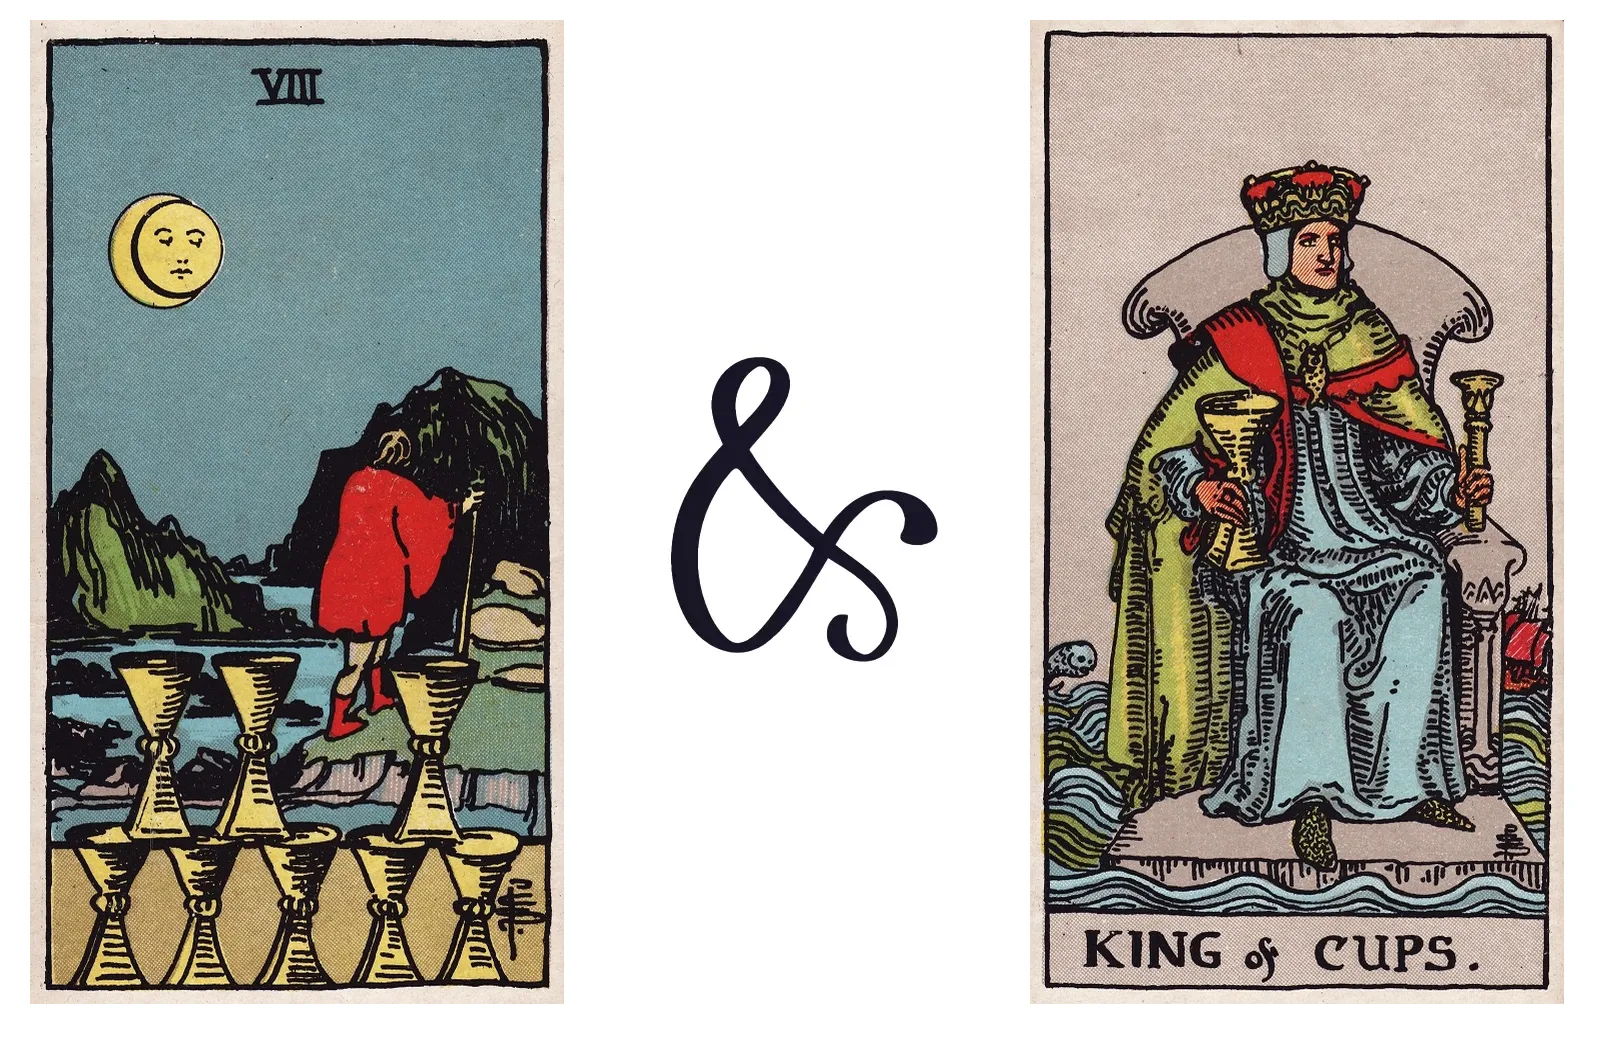 Eight of Cups and King of Cups